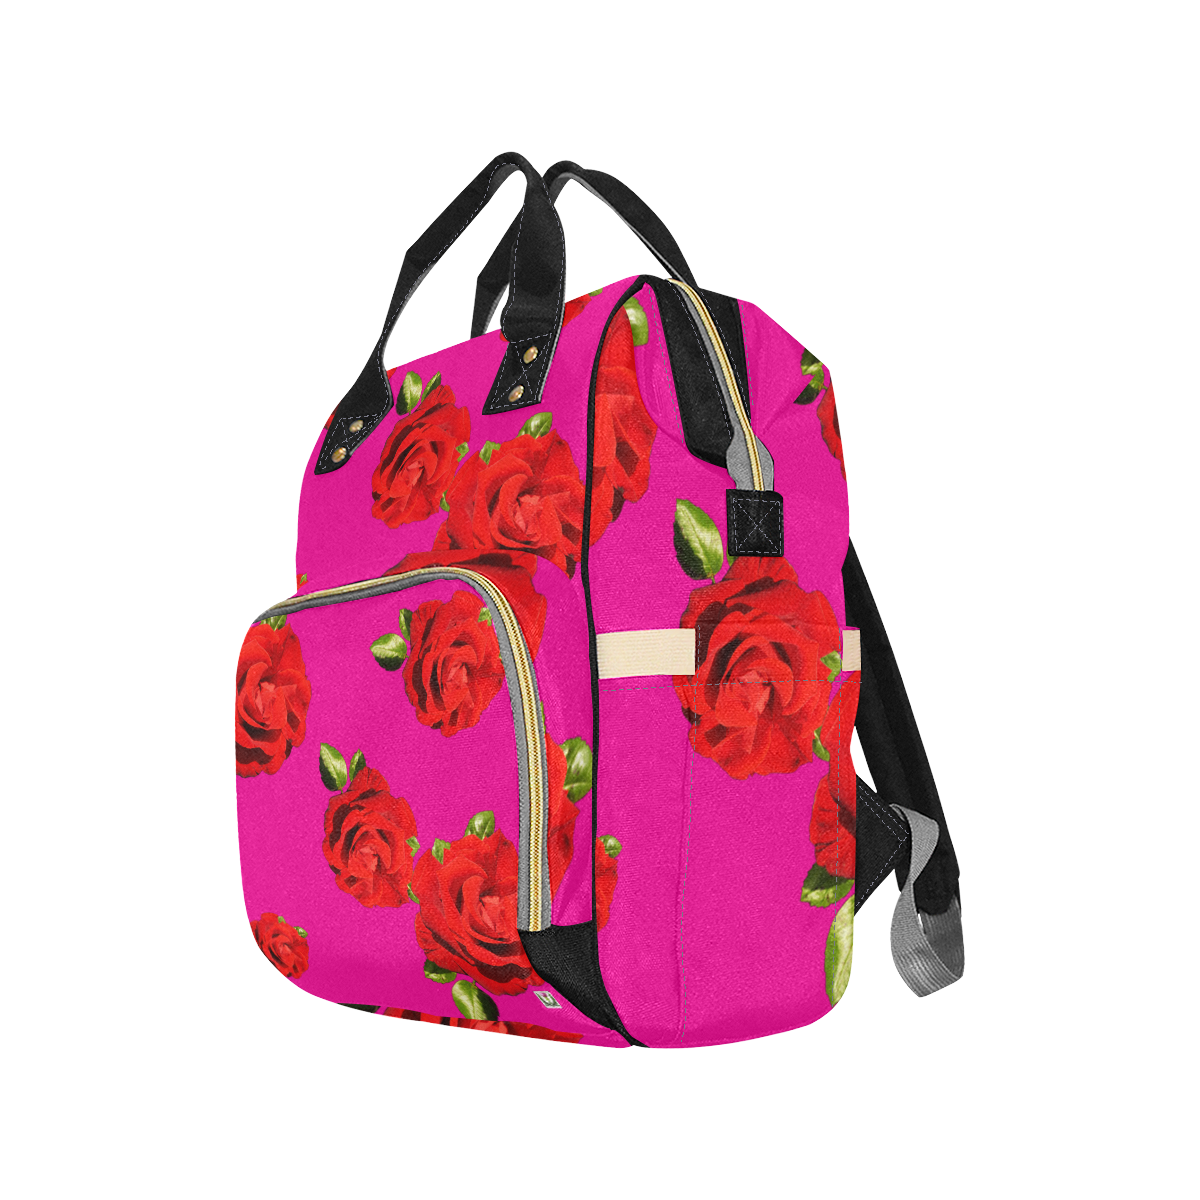 Fairlings Delight's Floral Luxury Collection- Red Rose Multi-Function Diaper Backpack 53086c7 Multi-Function Diaper Backpack/Diaper Bag (Model 1688)